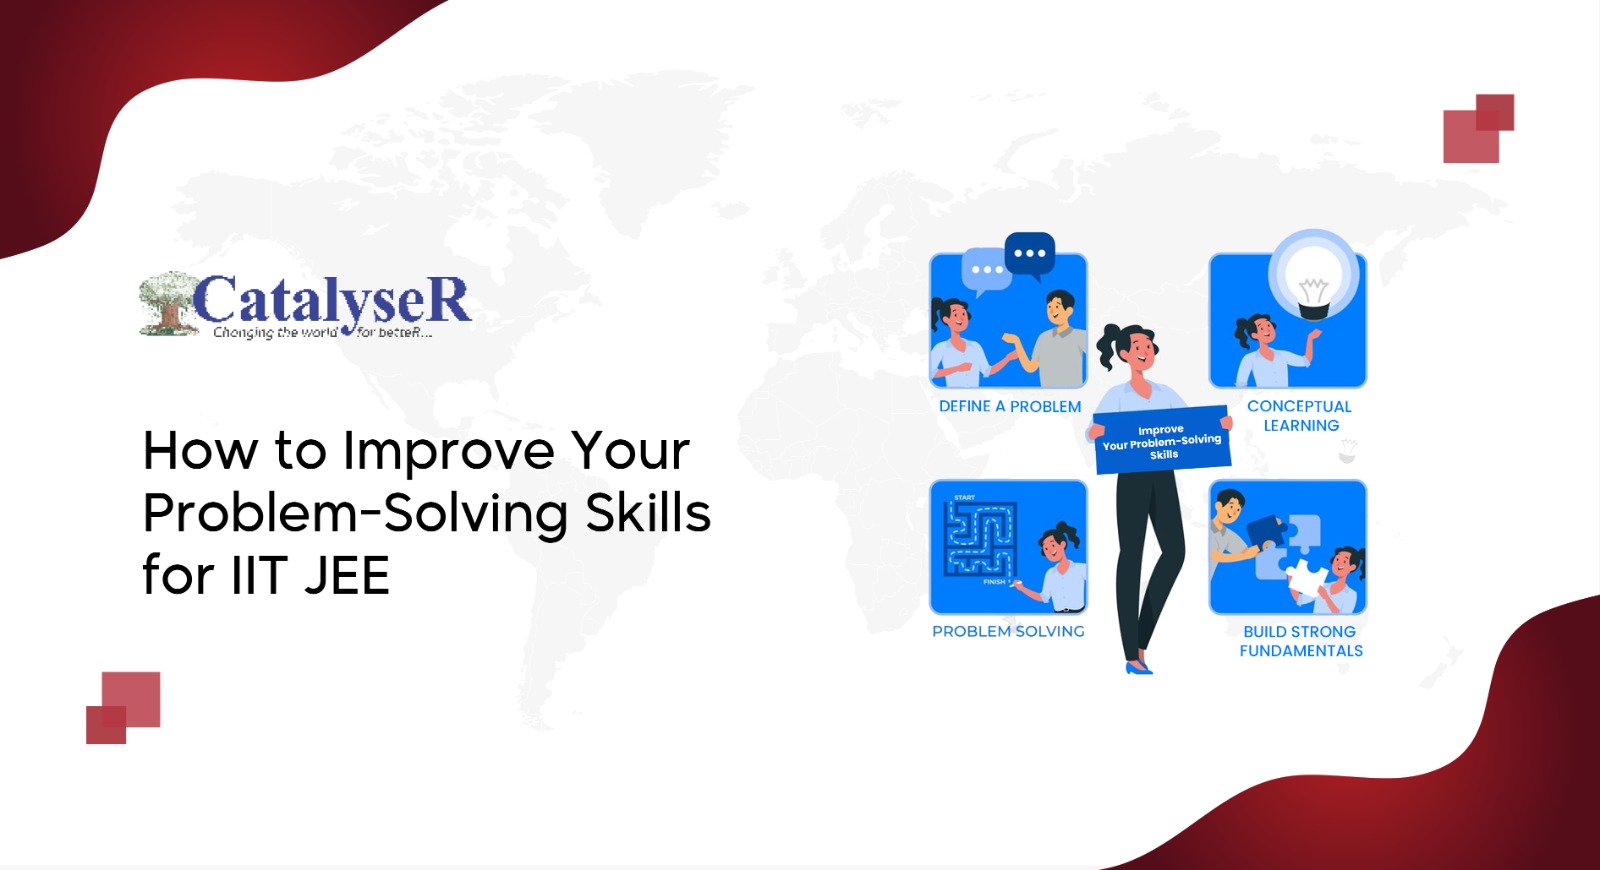 How to Improve Your Problem-Solving Skills for IIT JEE